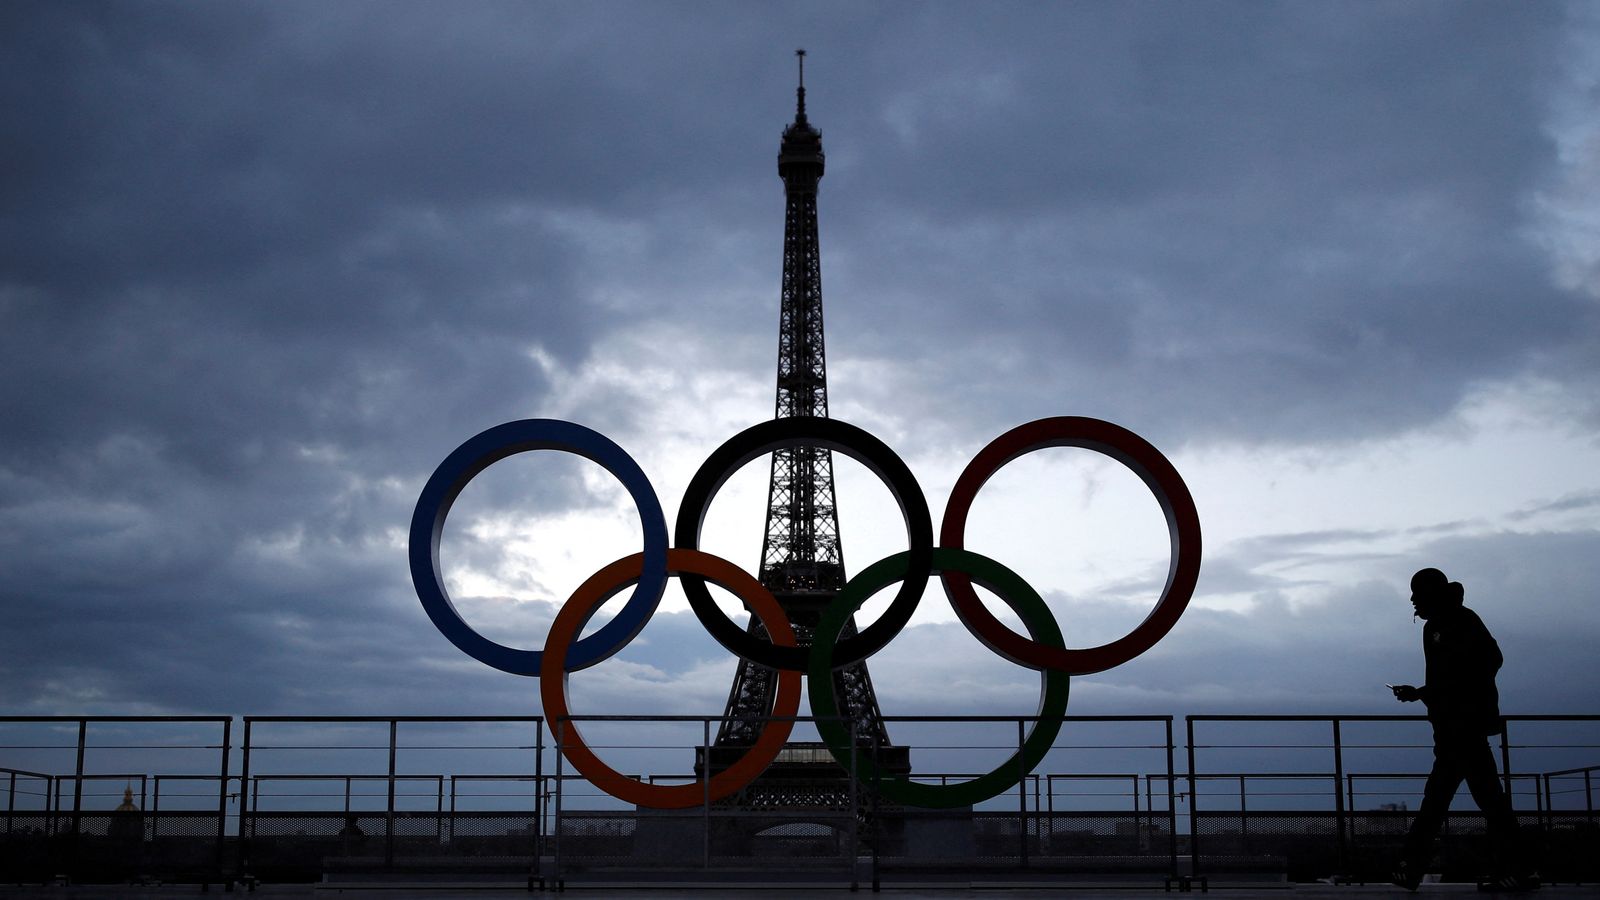 Paris Olympics: 16-year-old arrested after he said he wanted to ‘die a martyr’ at Games